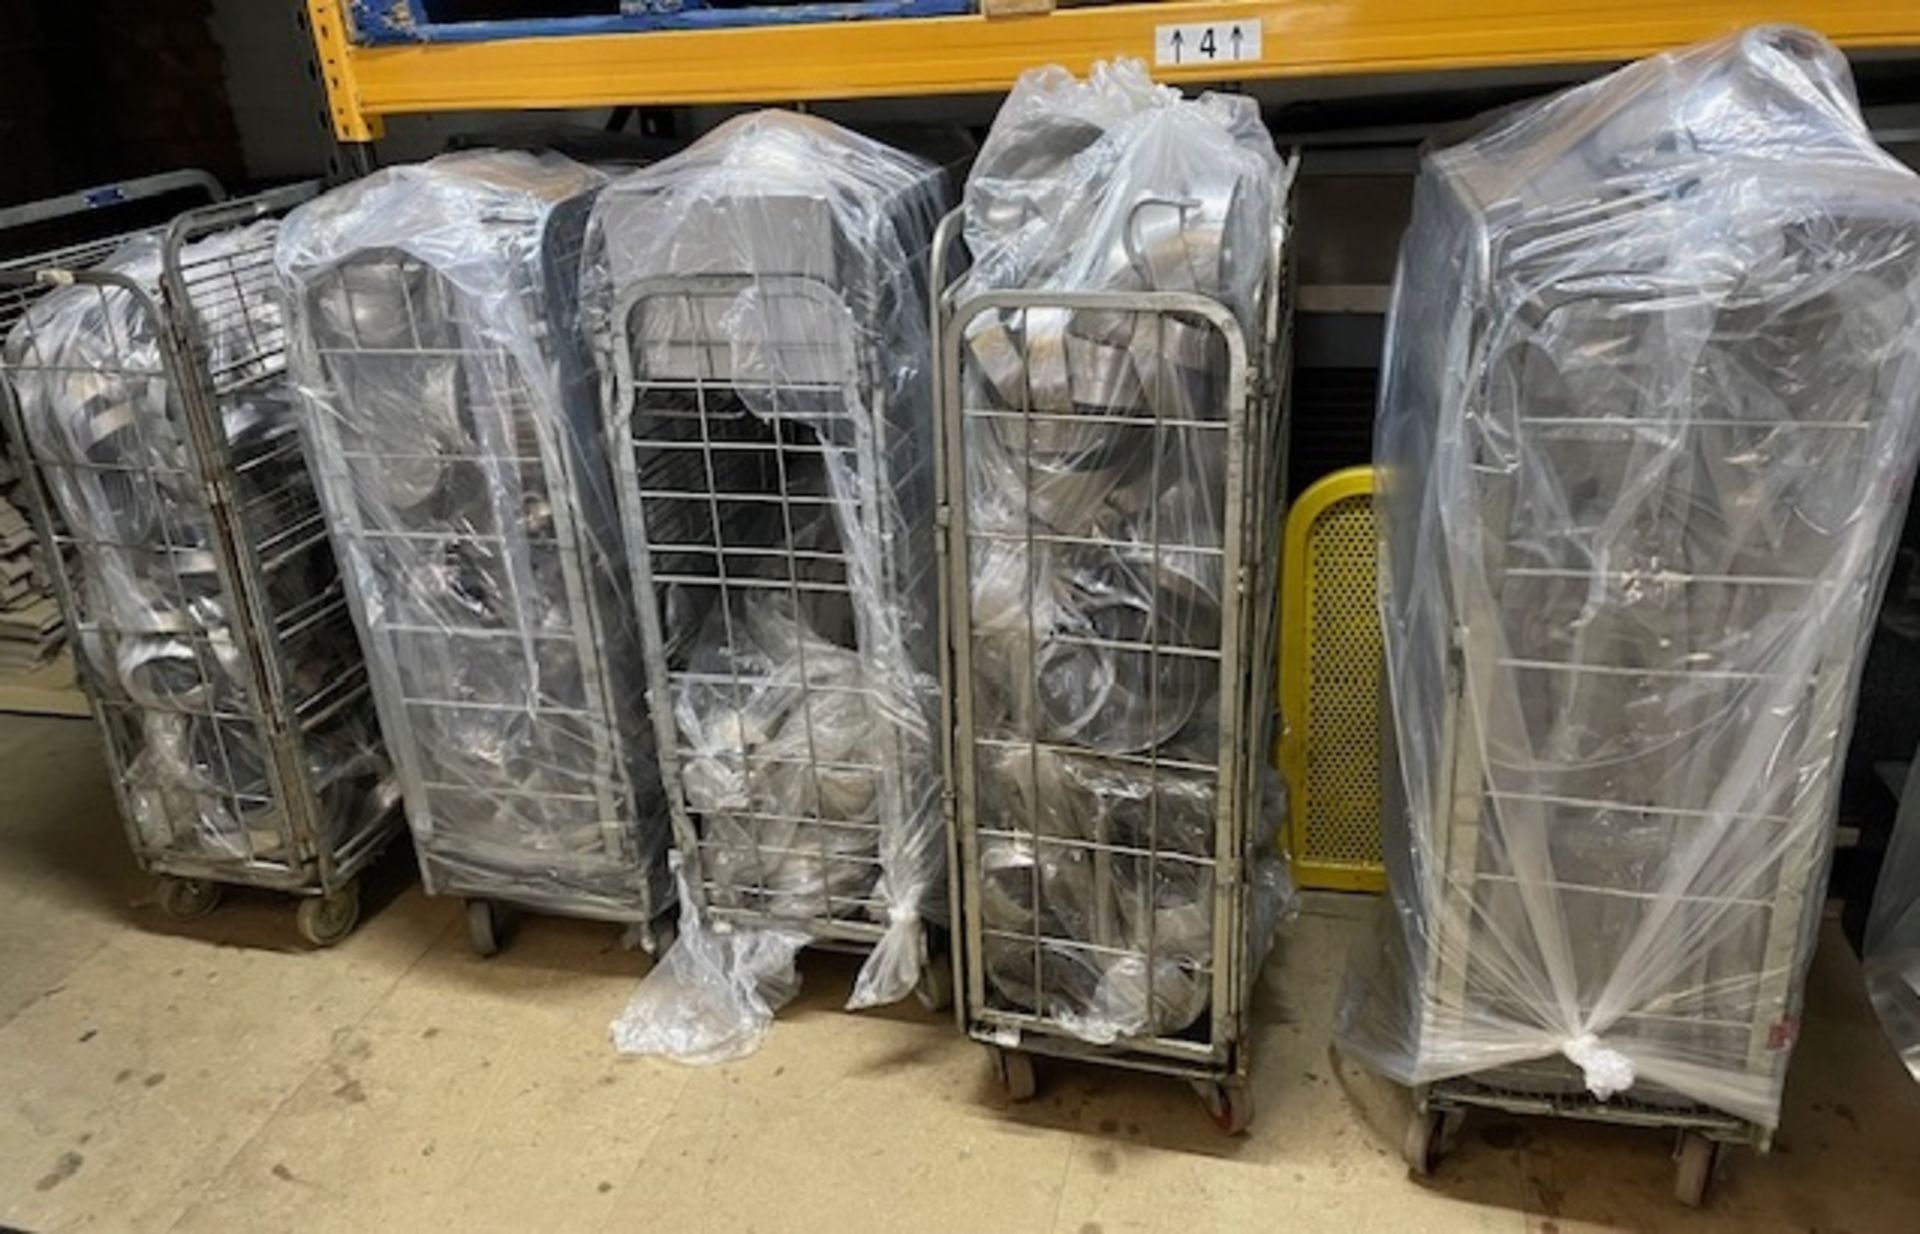 5 Cage Trollies & Contents of Assorted Stainless Steel Rings (Mezzanine) (Location: NW London.